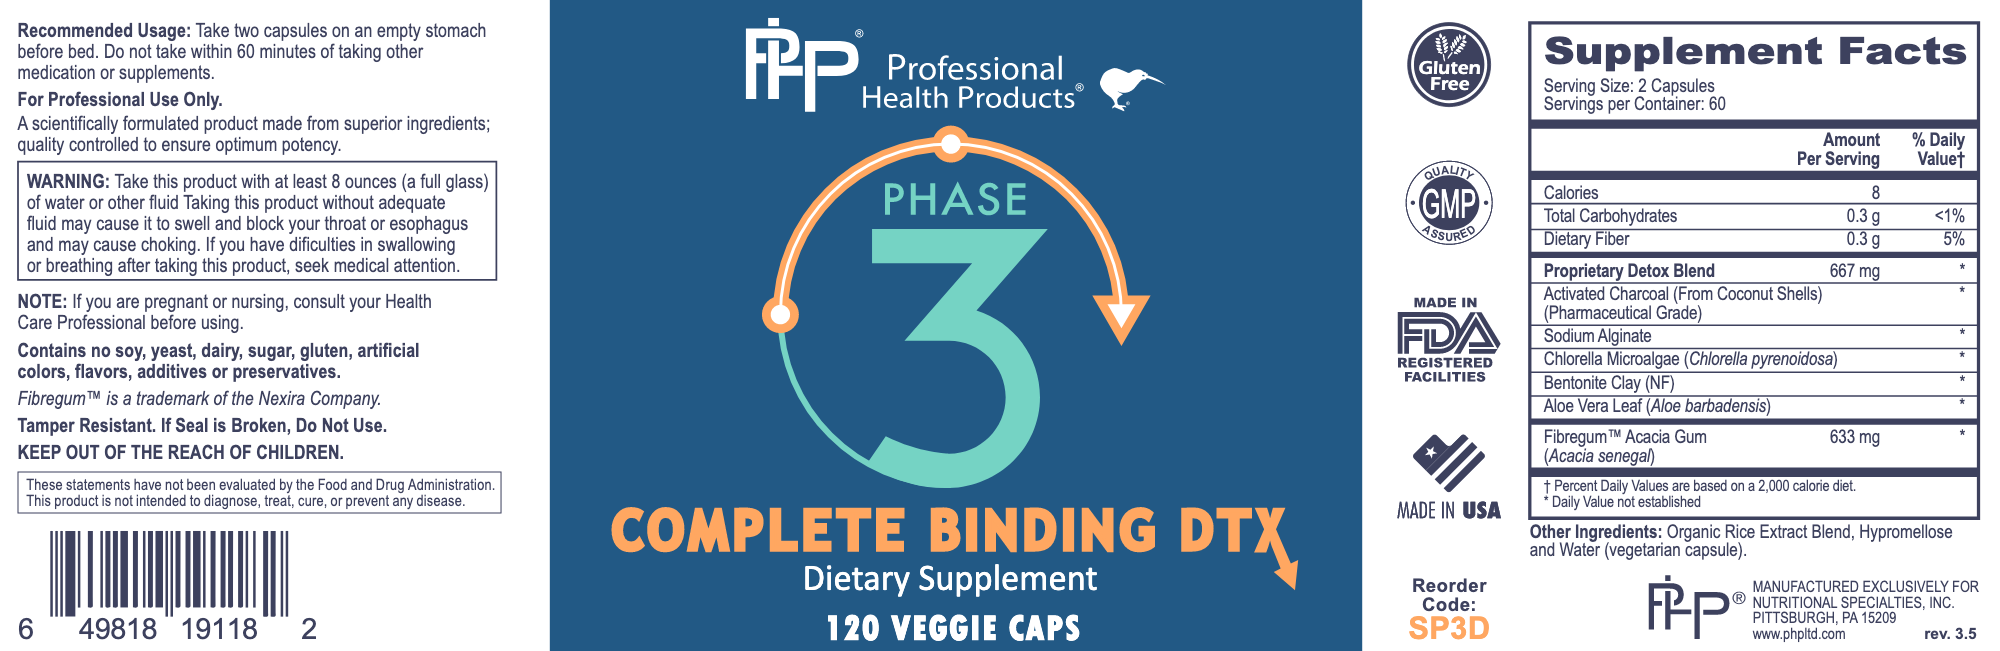 Phase 3 Complete Binding DTX (120 Capsules)-Vitamins & Supplements-Professional Health Products-Pine Street Clinic